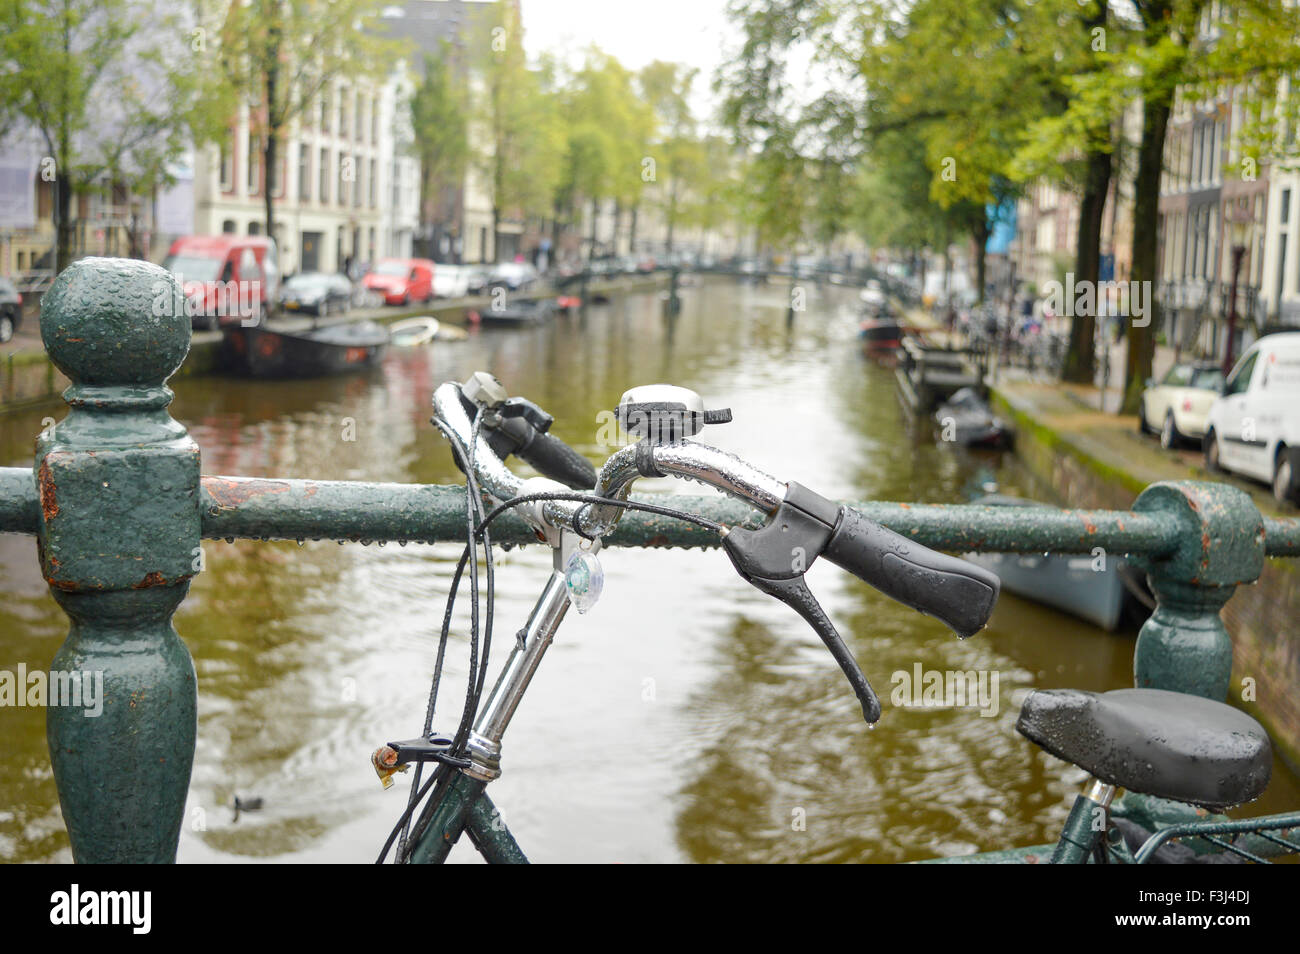 Bicycle parked on a bridge in Amsterdam on a rainy day Stock Photo